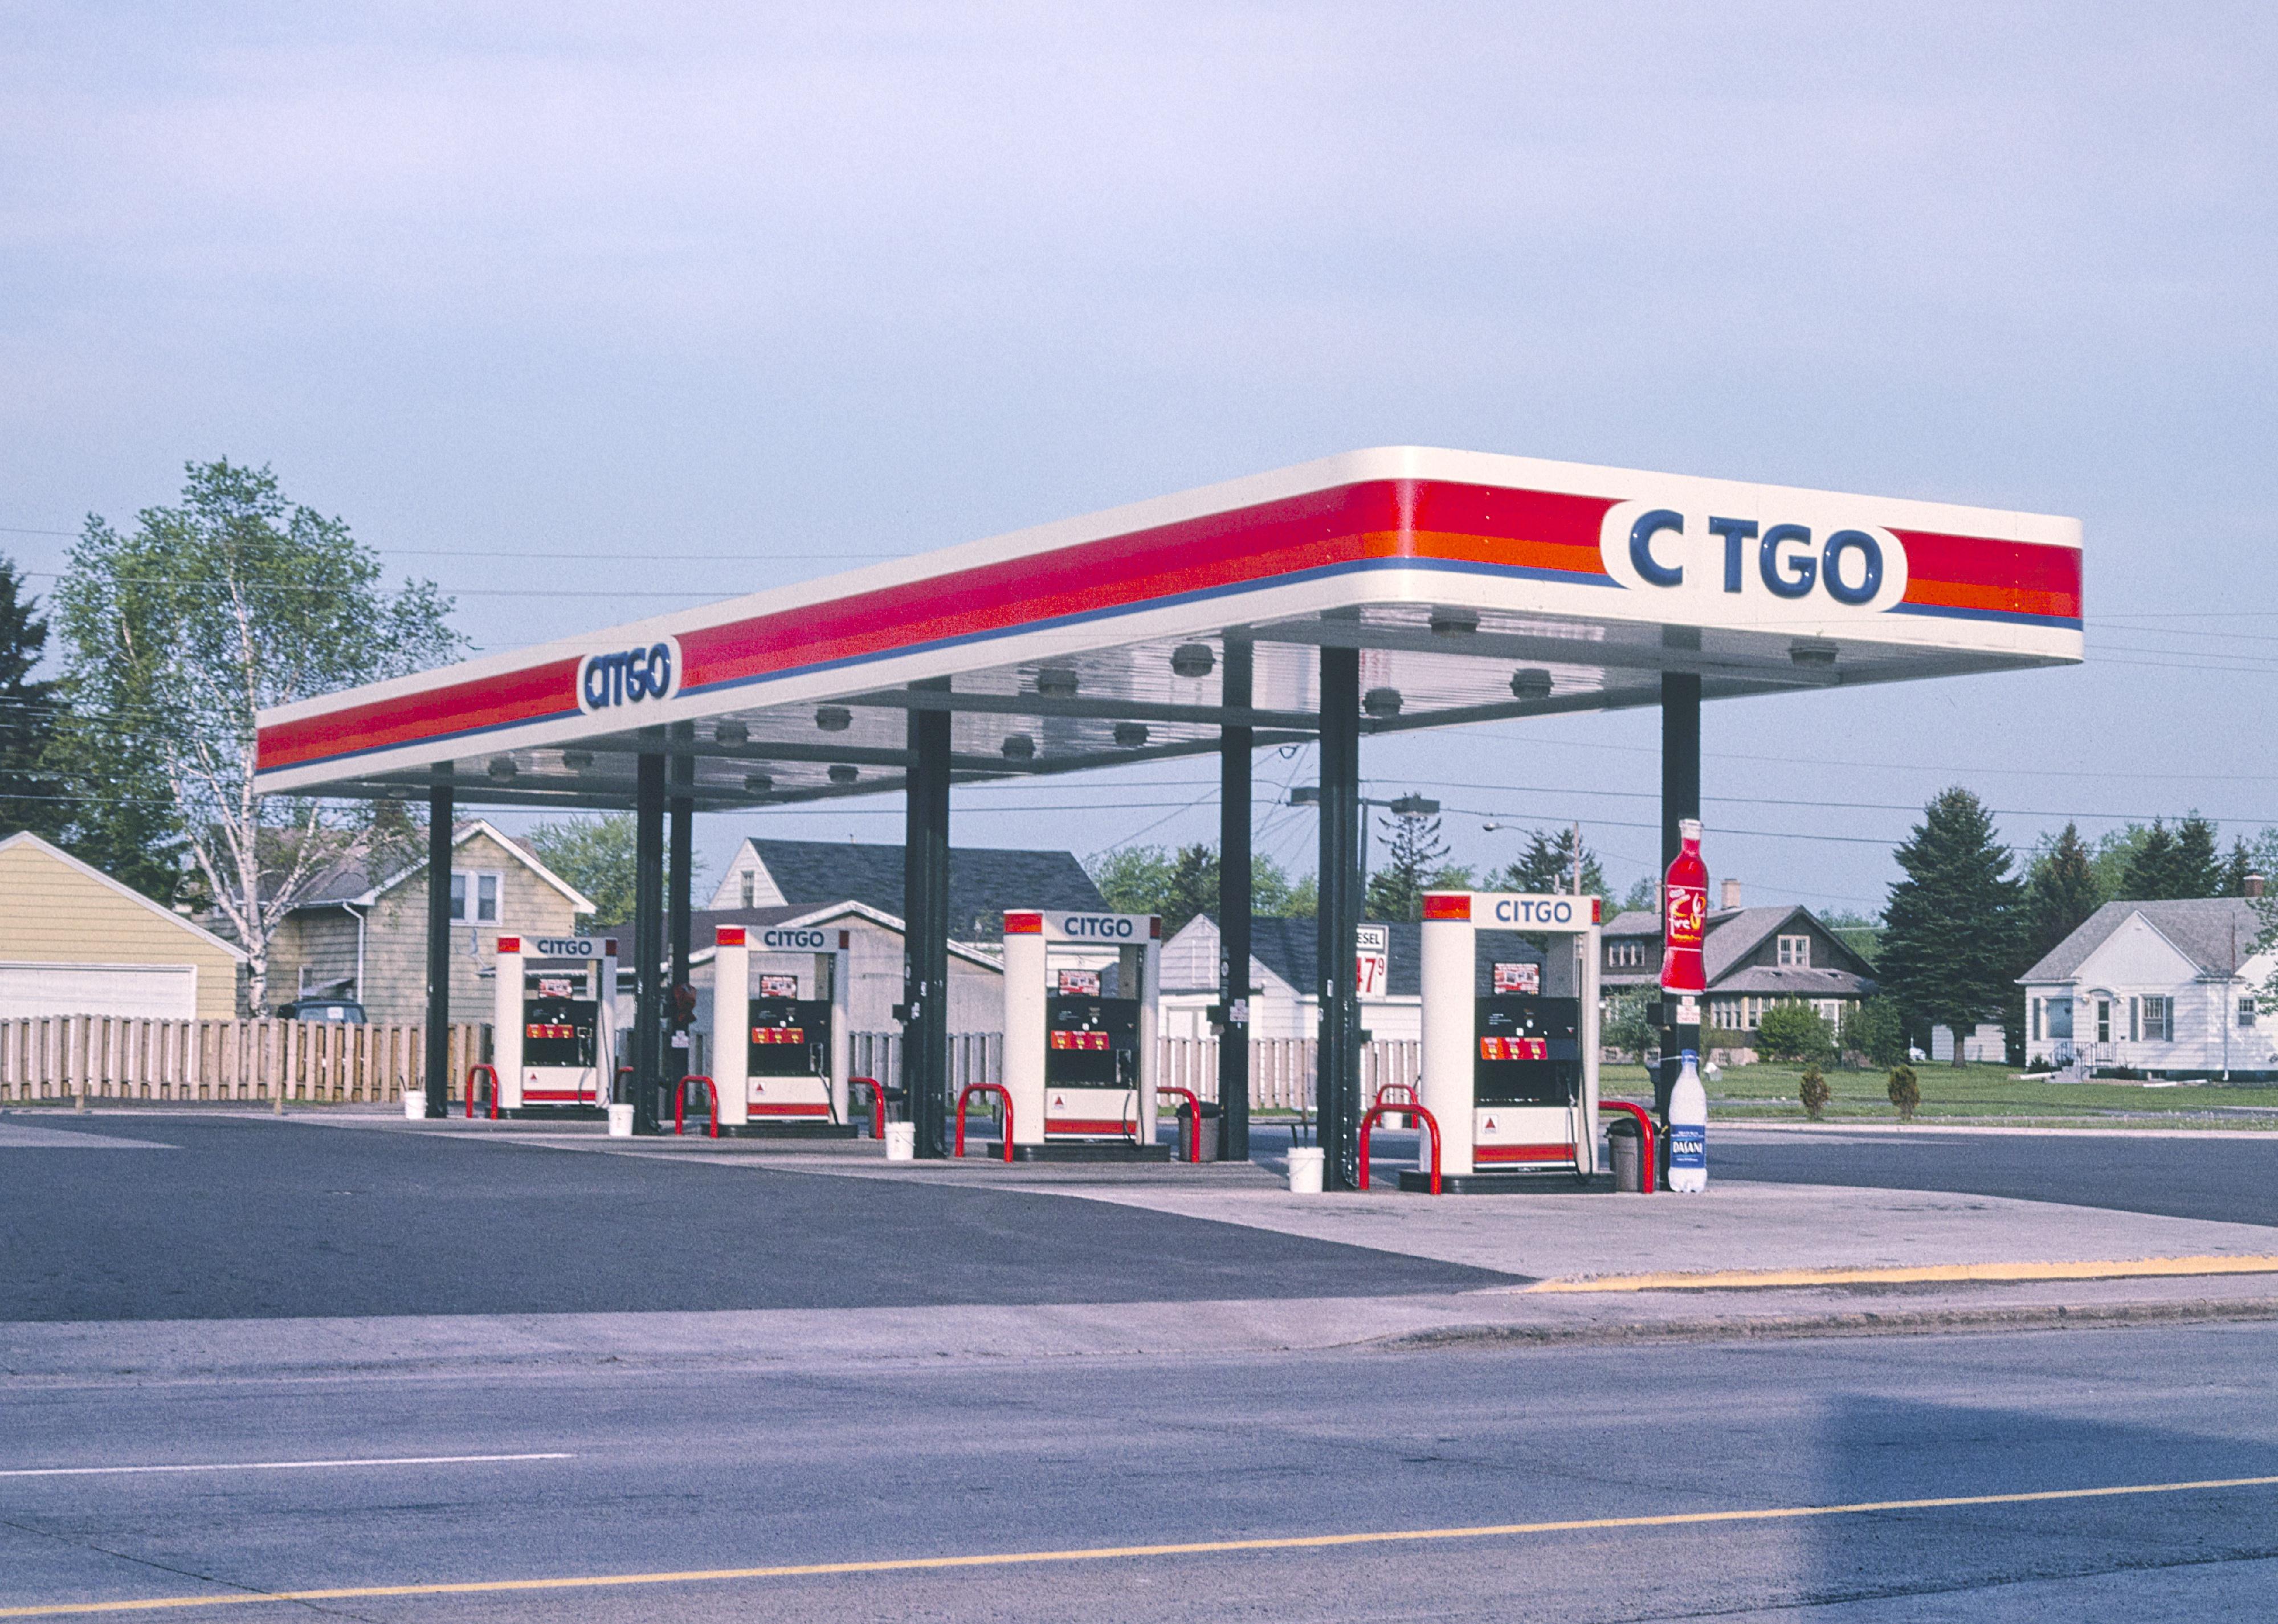 Citgo gas station in 2003 on Route 2 in Superior, Wisconsin.